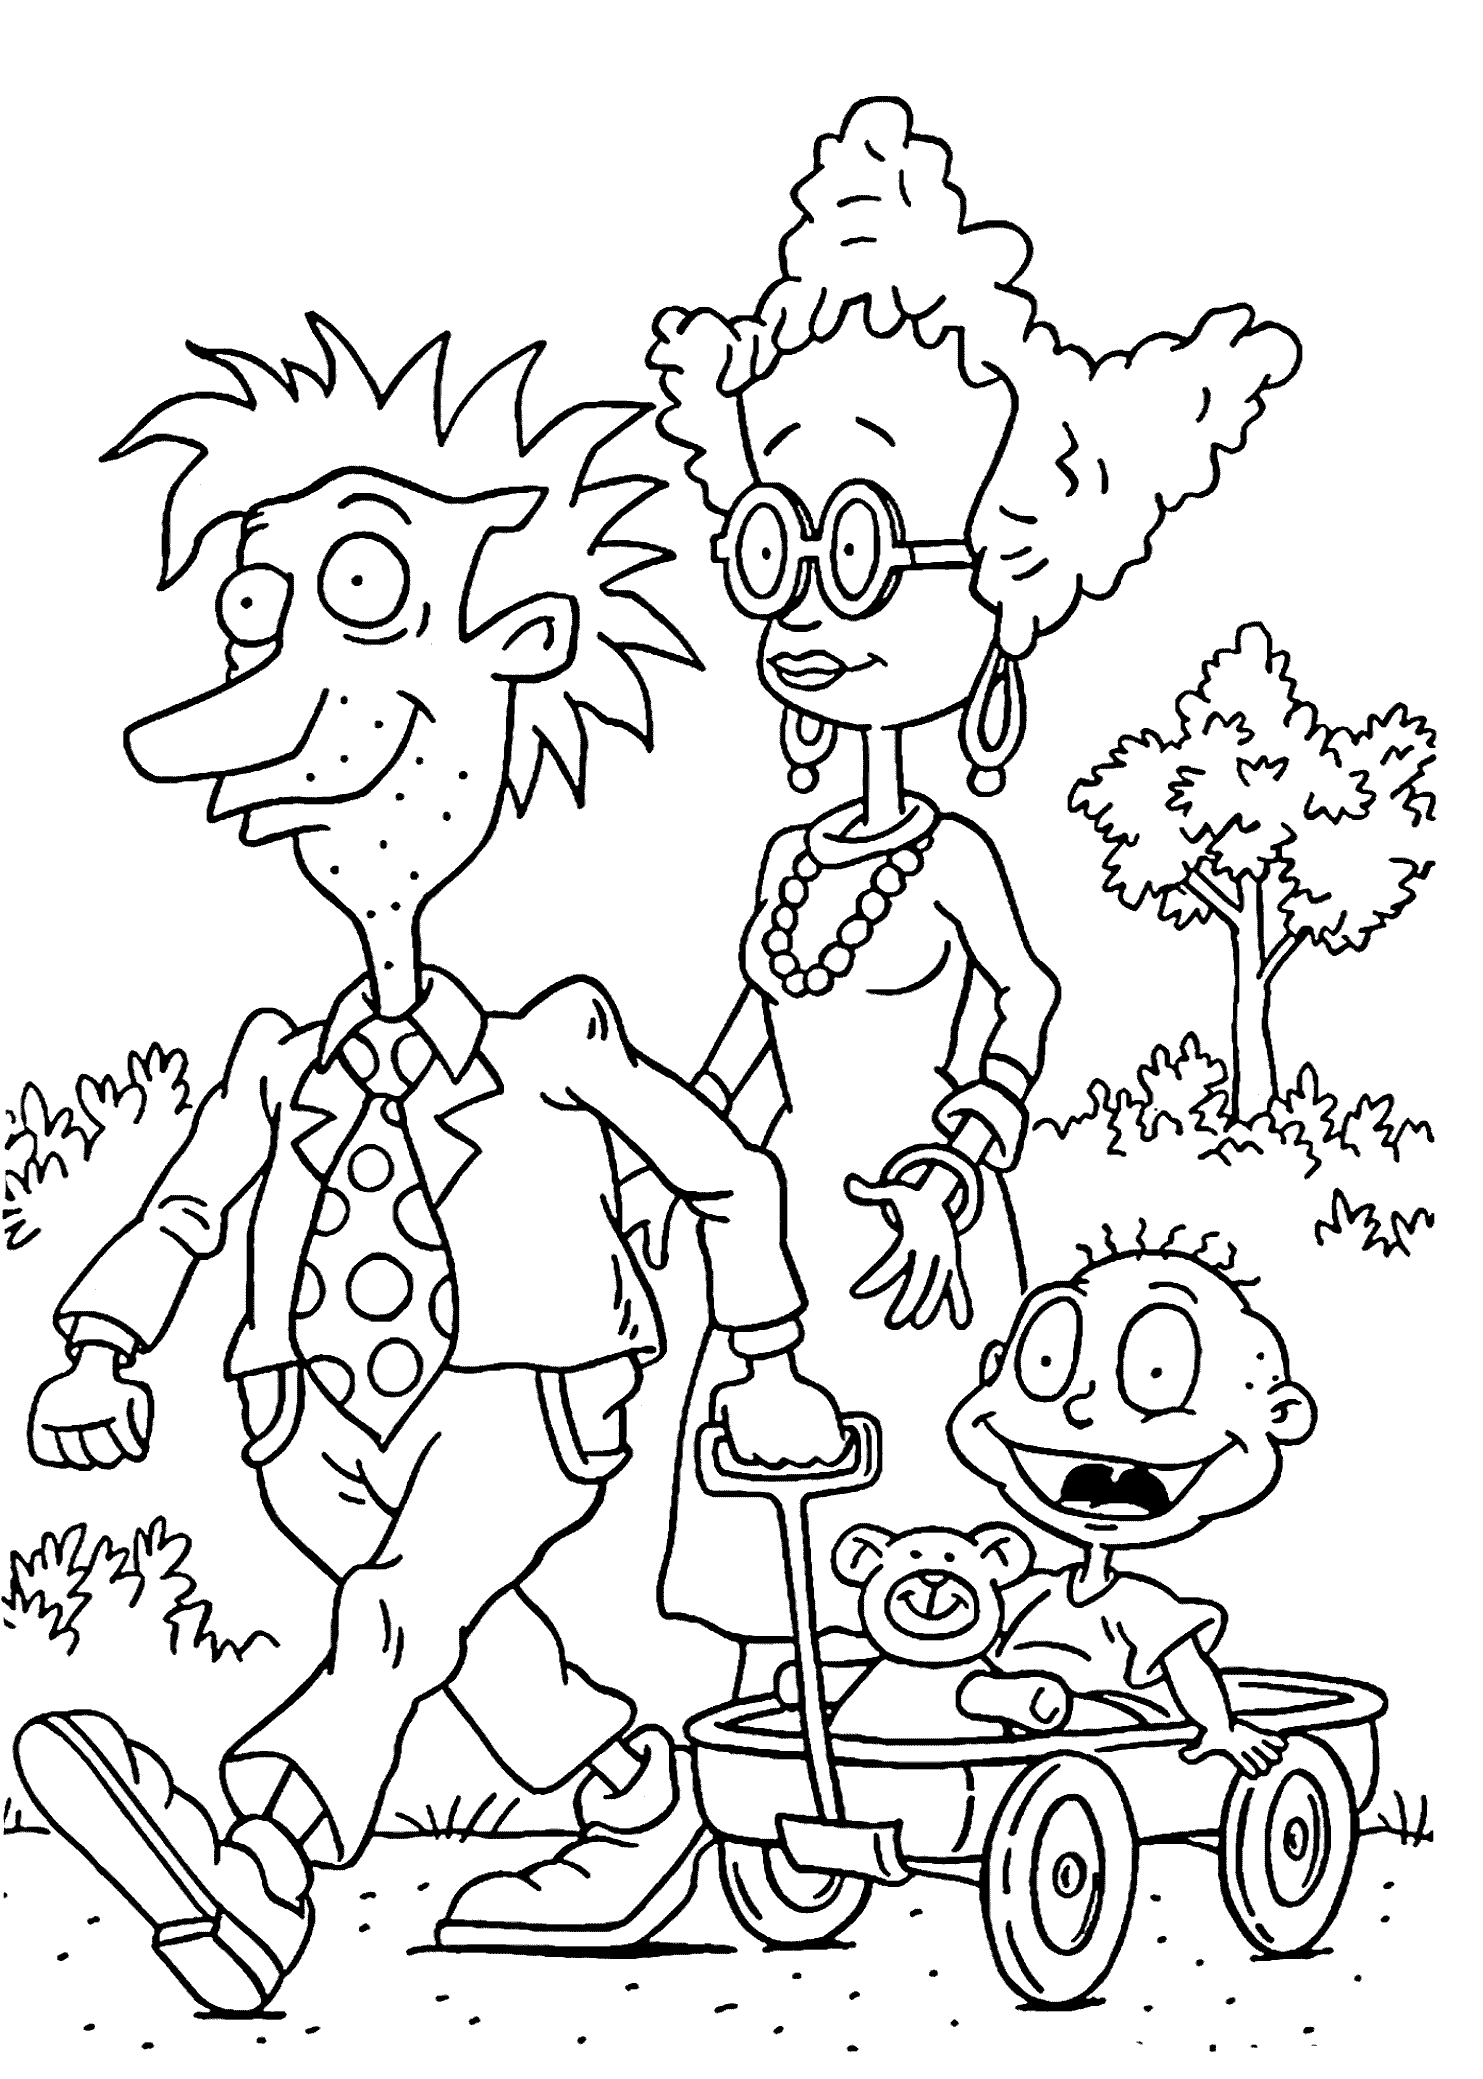 coloring pages of rugrats